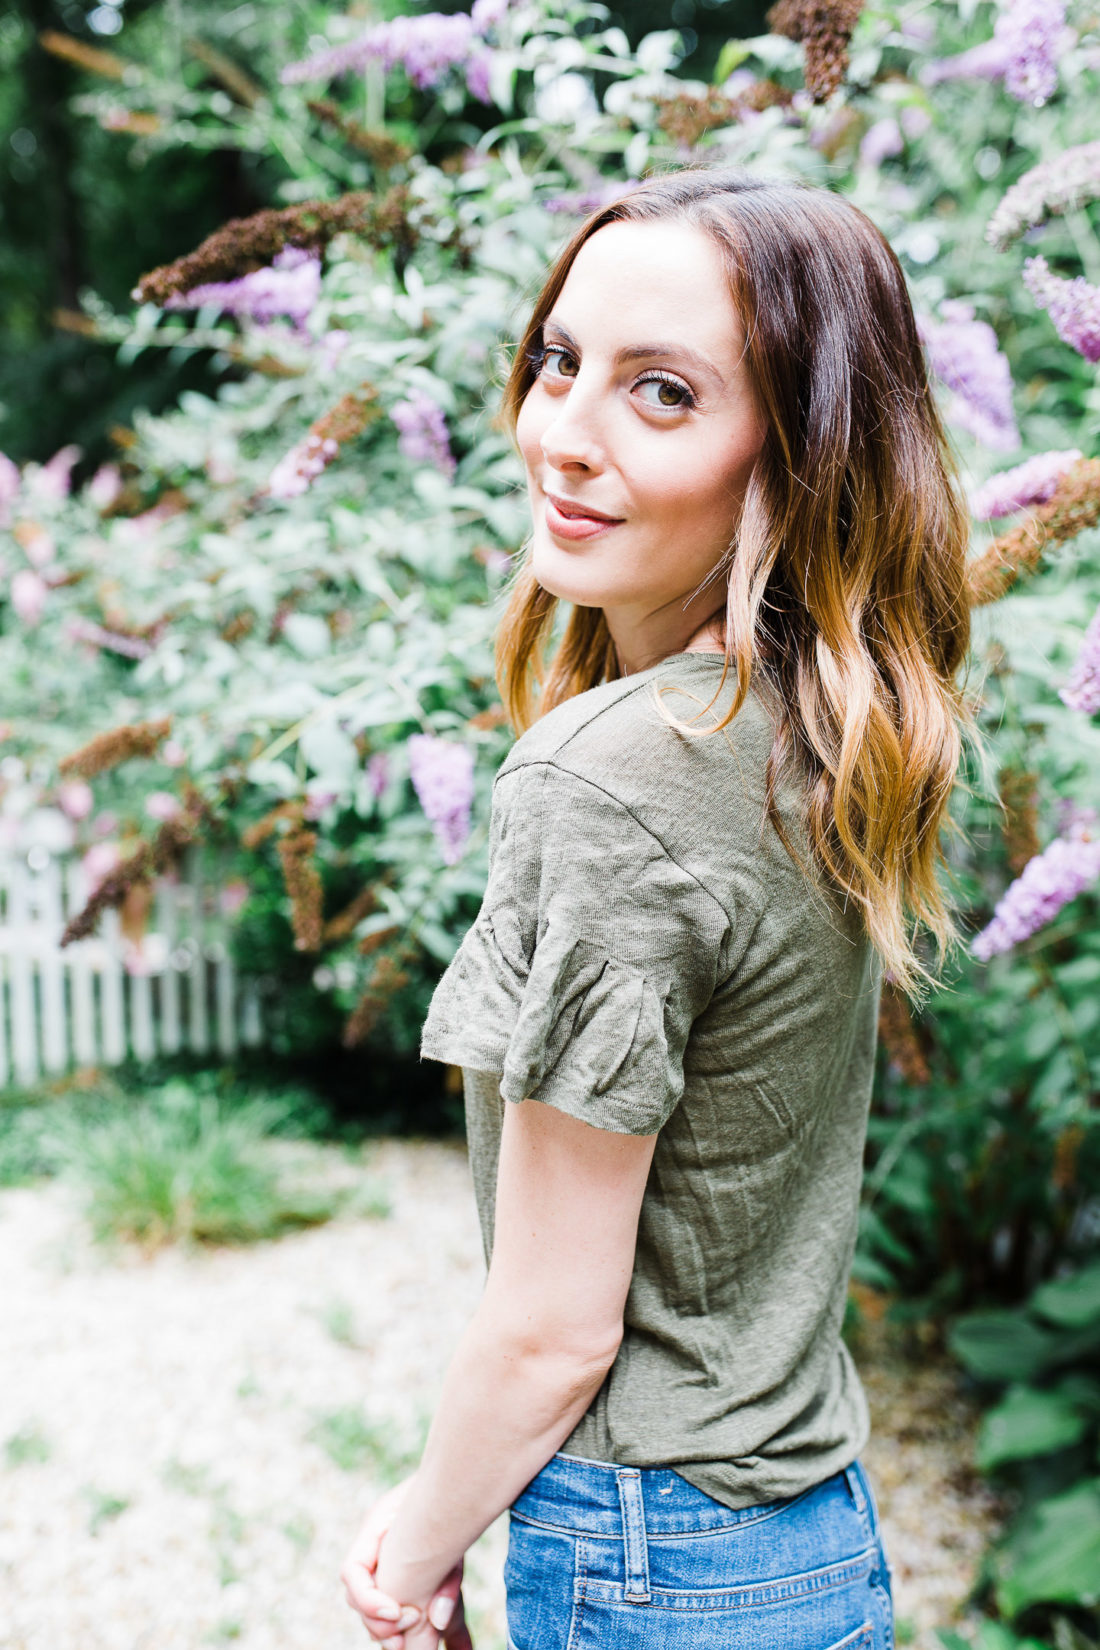 Eva Amurri Martino wears an army green flutter sleeve linen Tshirt in the courtyard of her Connecticut home